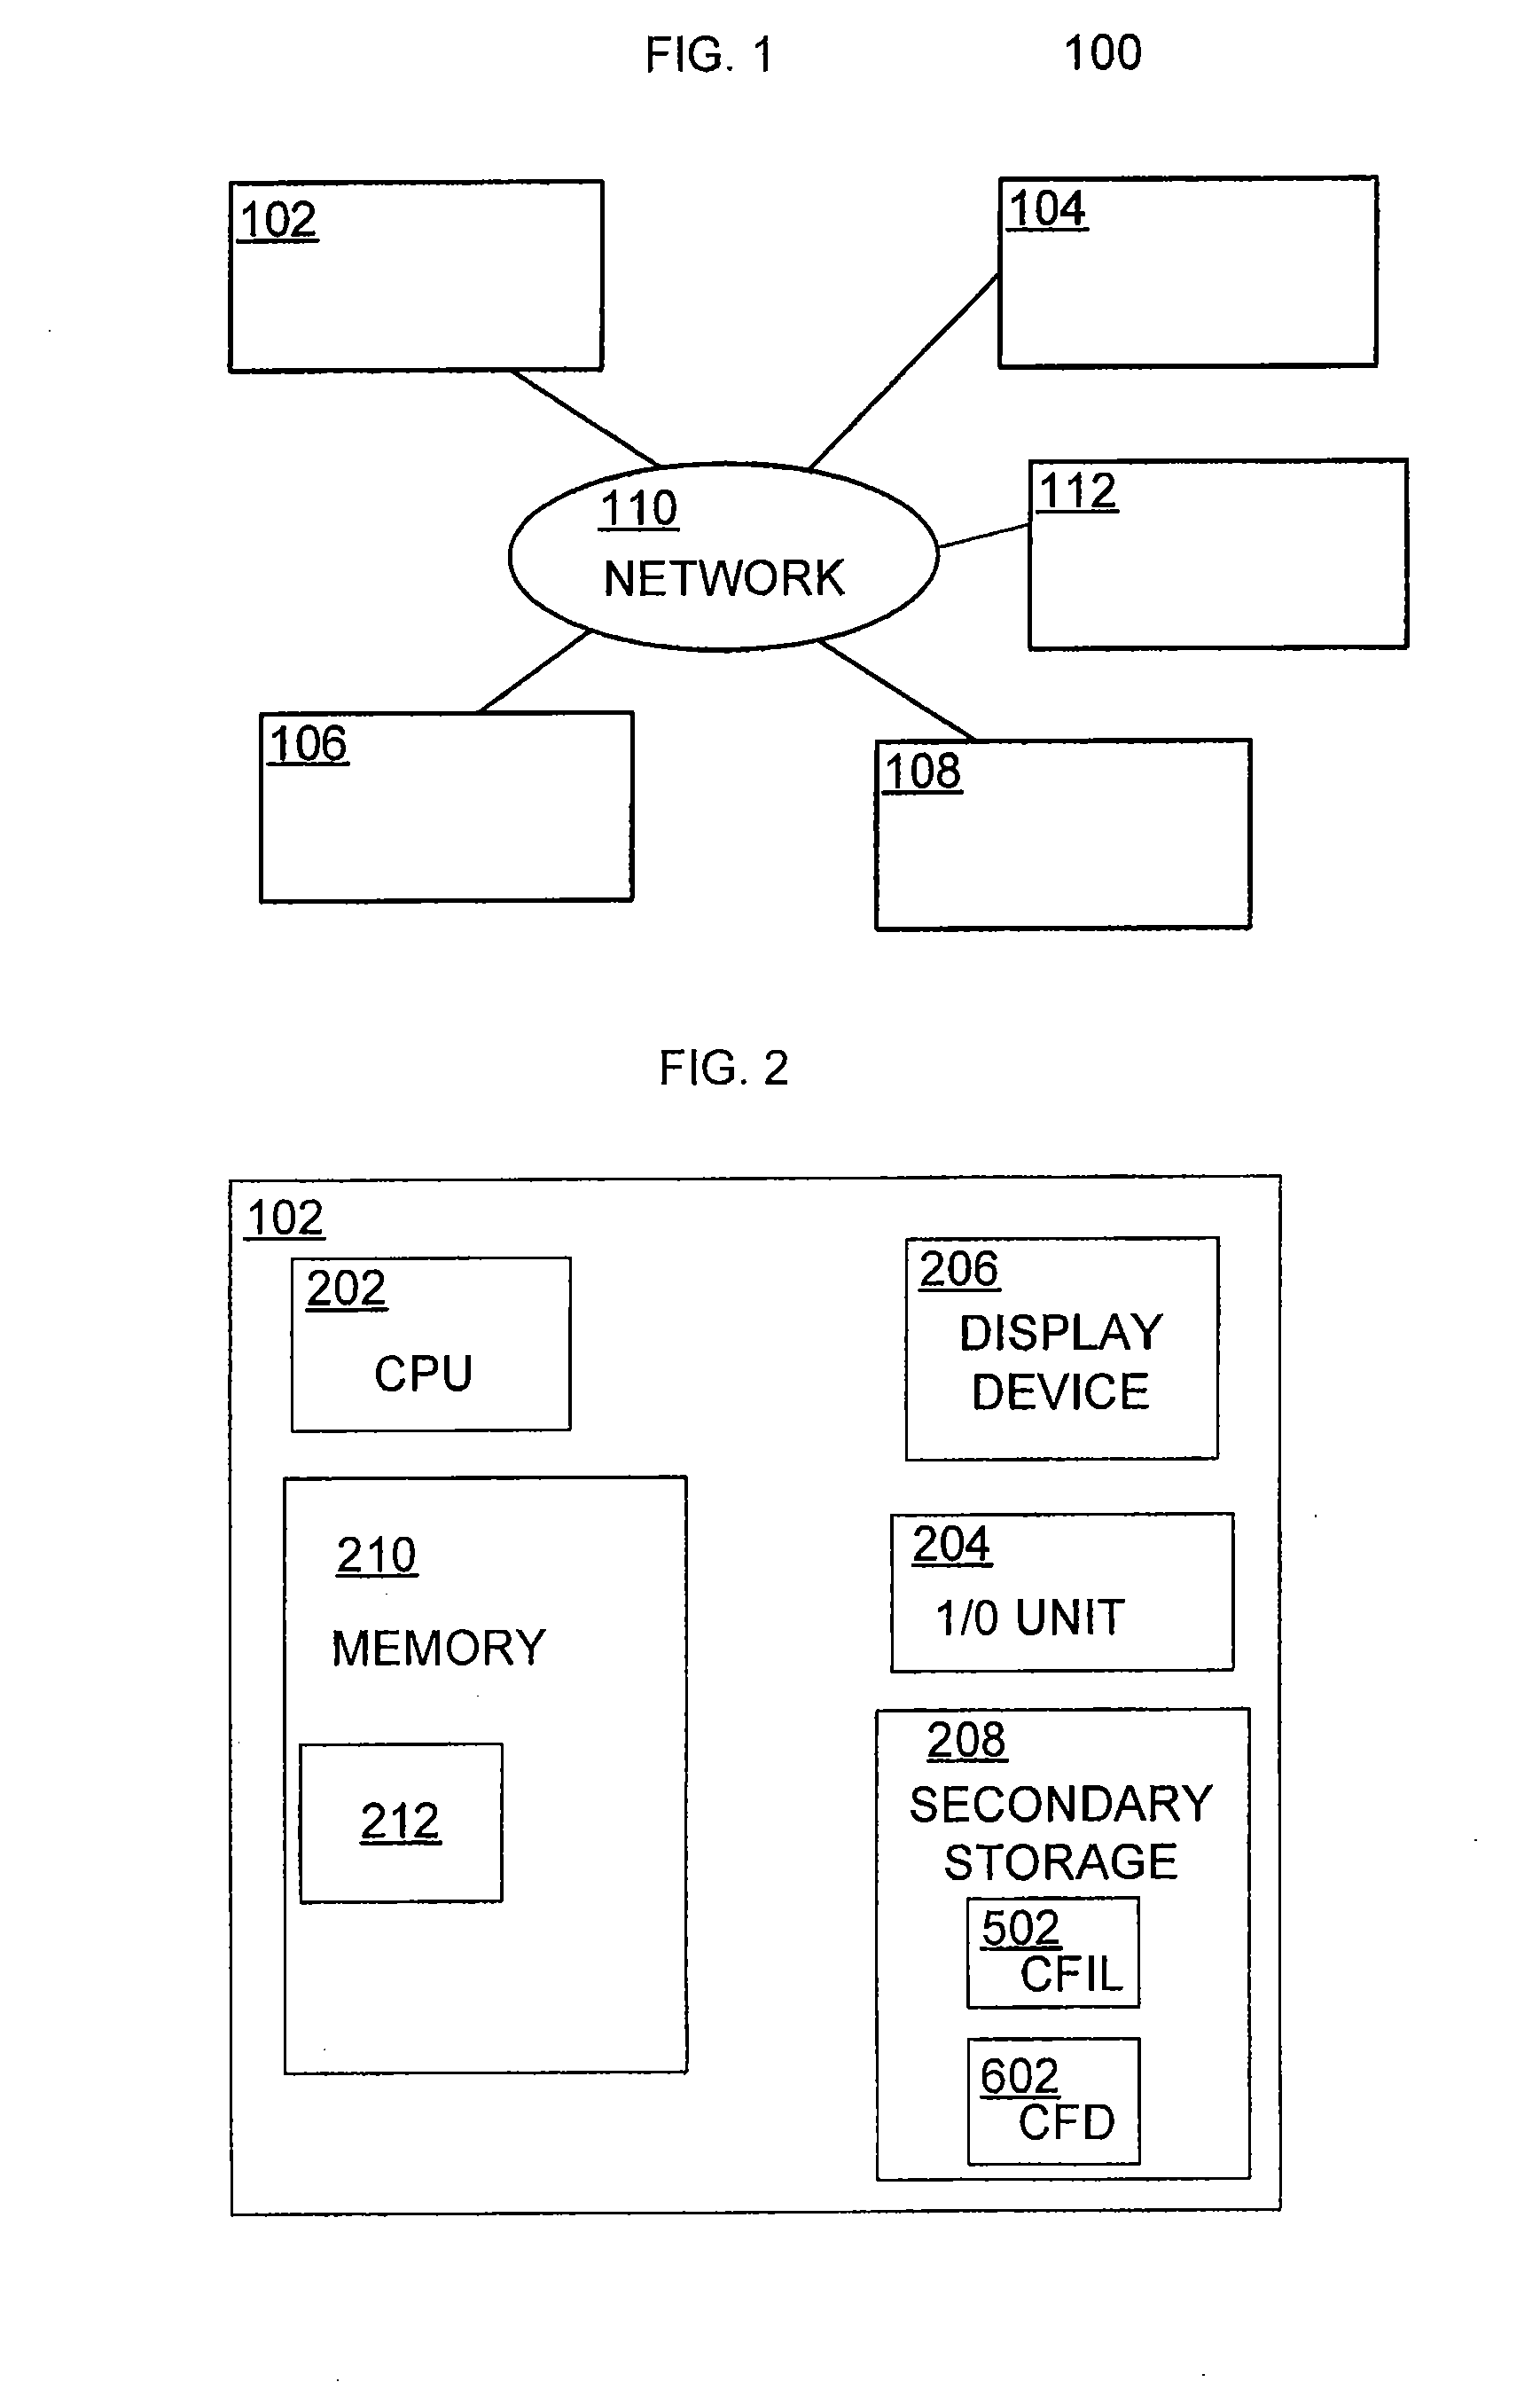 Methods and systems for managing similar and dissimilar entities